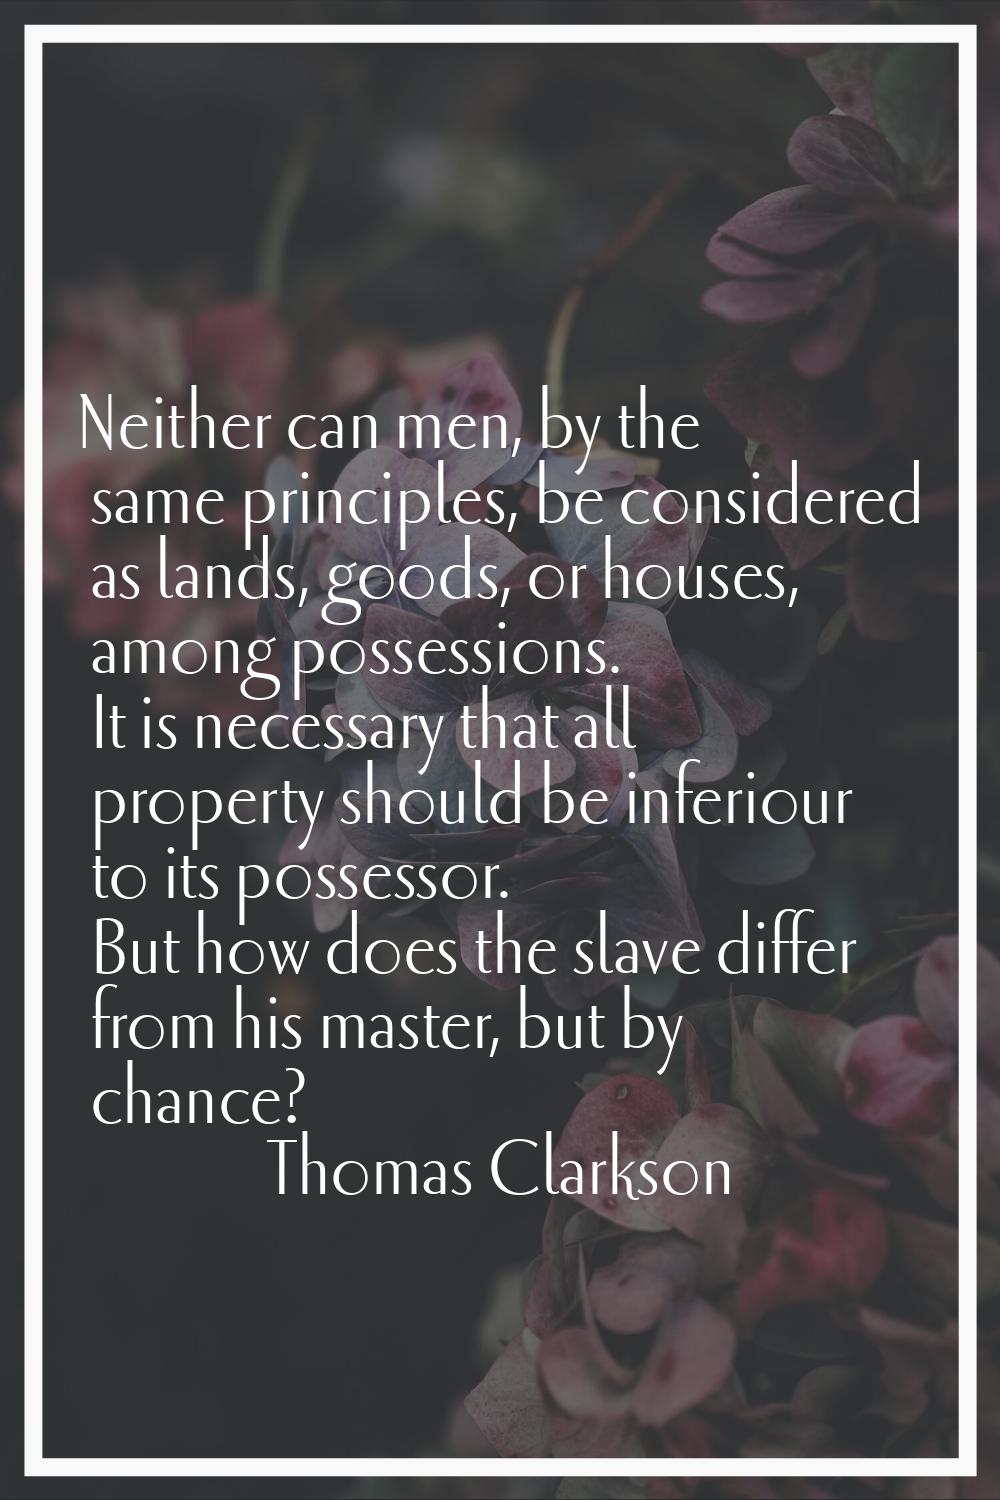 Neither can men, by the same principles, be considered as lands, goods, or houses, among possession